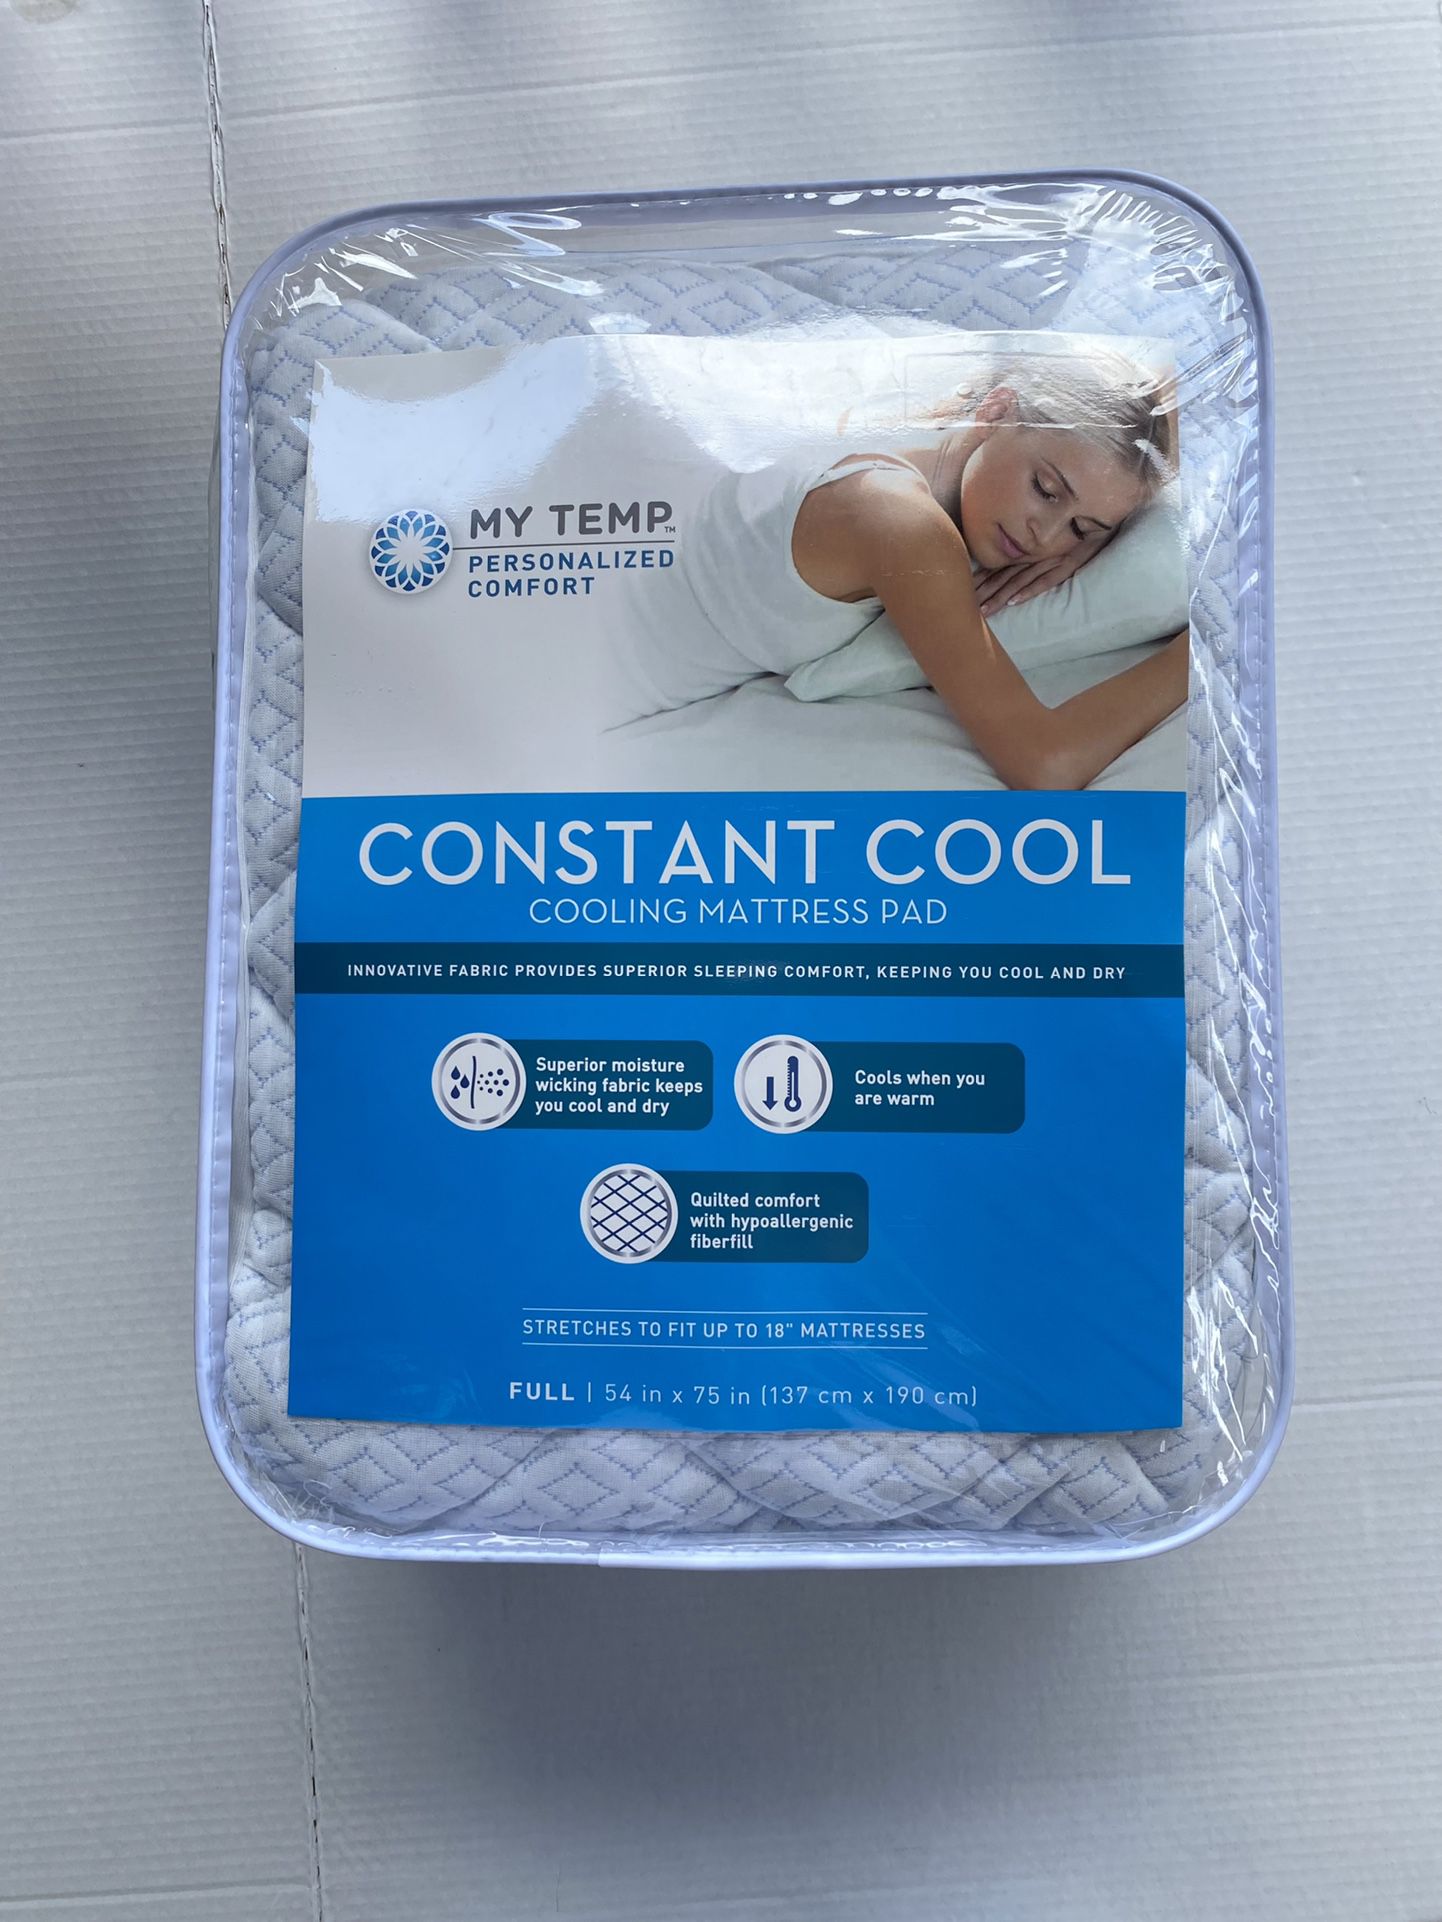 My Temp Personalized Confort Cooling Mattress Pad Sz Full  COOLING MATTRESS PAD INNOVATIVE FABRIC PROVIDES SUPERIOR SLEEPING COMFORT KEEPING YOU COOL 